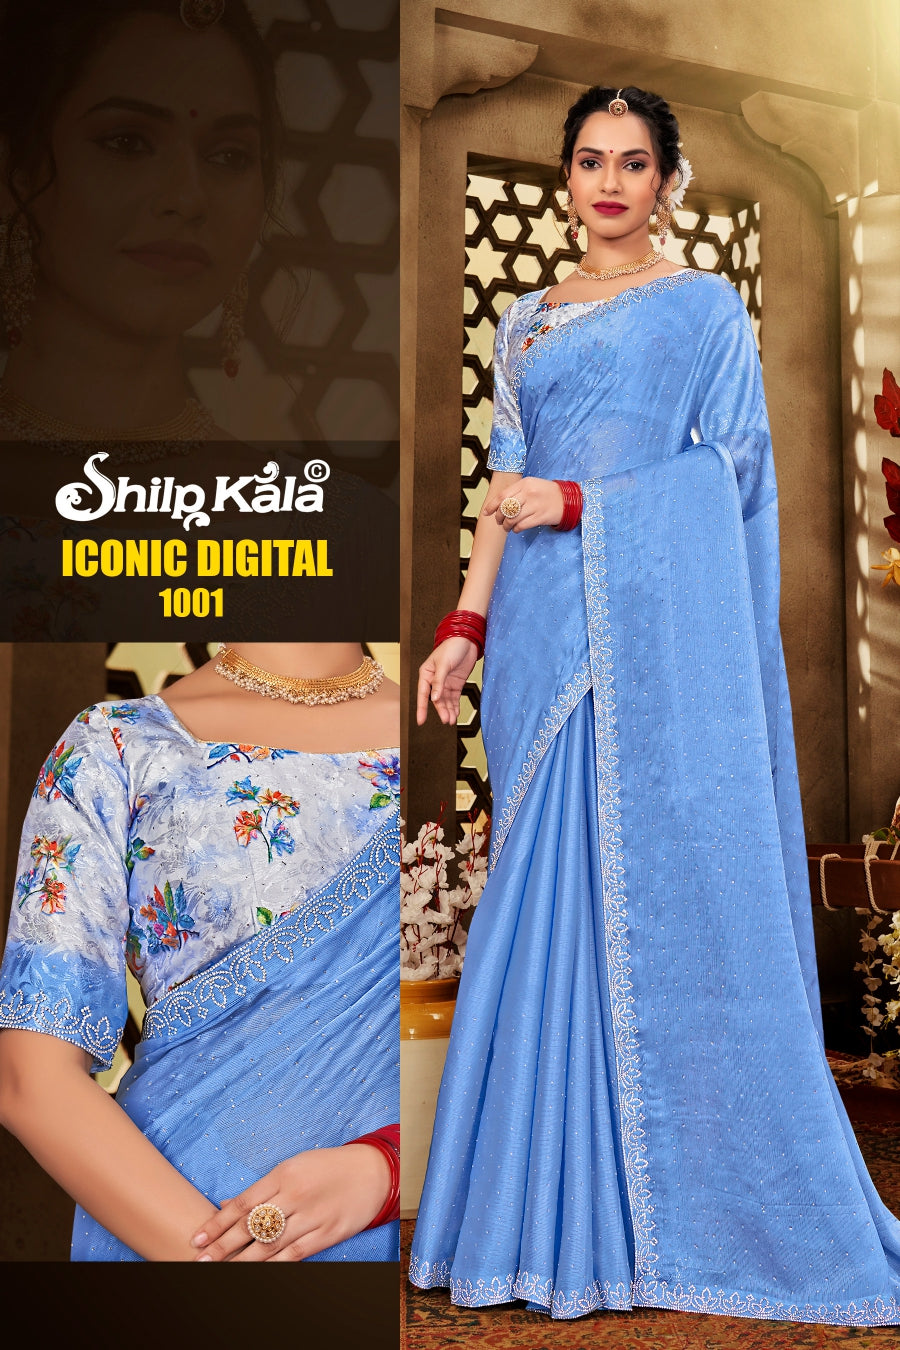 Iconic Shilpkala Saree with Jarkan Stone Work and Digital Shifli Blouse with Sequence Work